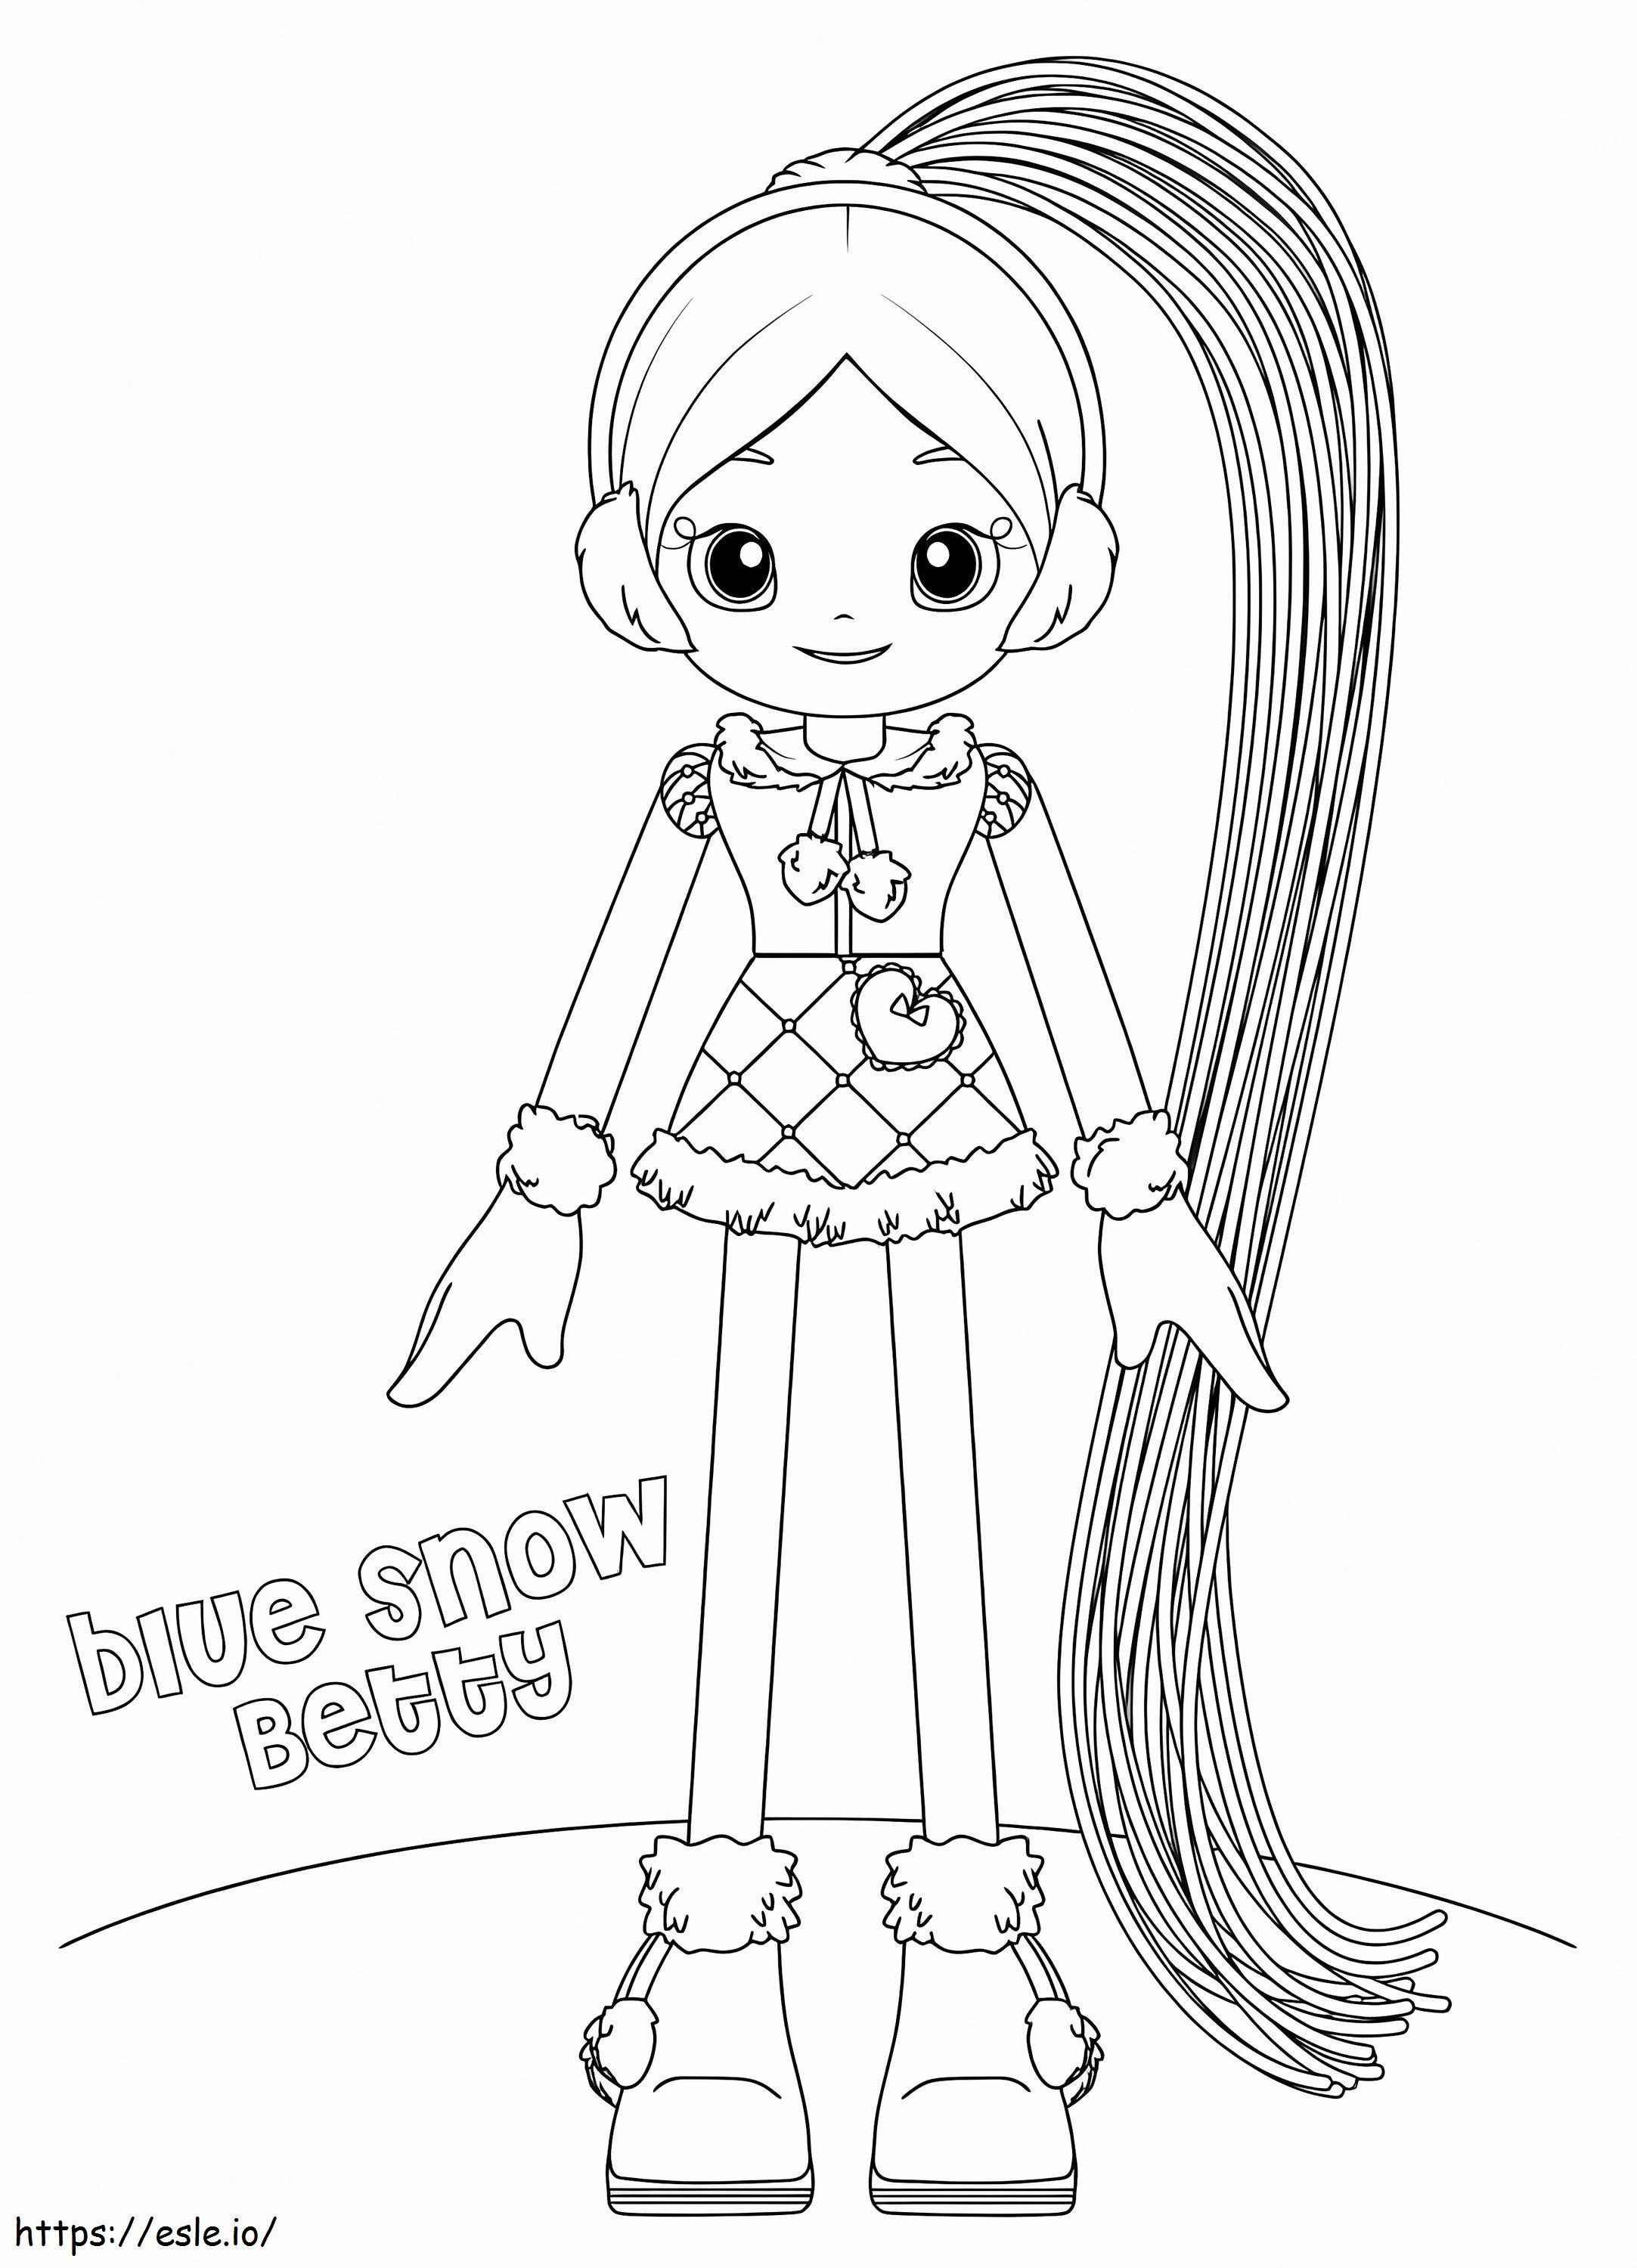 Blue Snow Betty coloring page